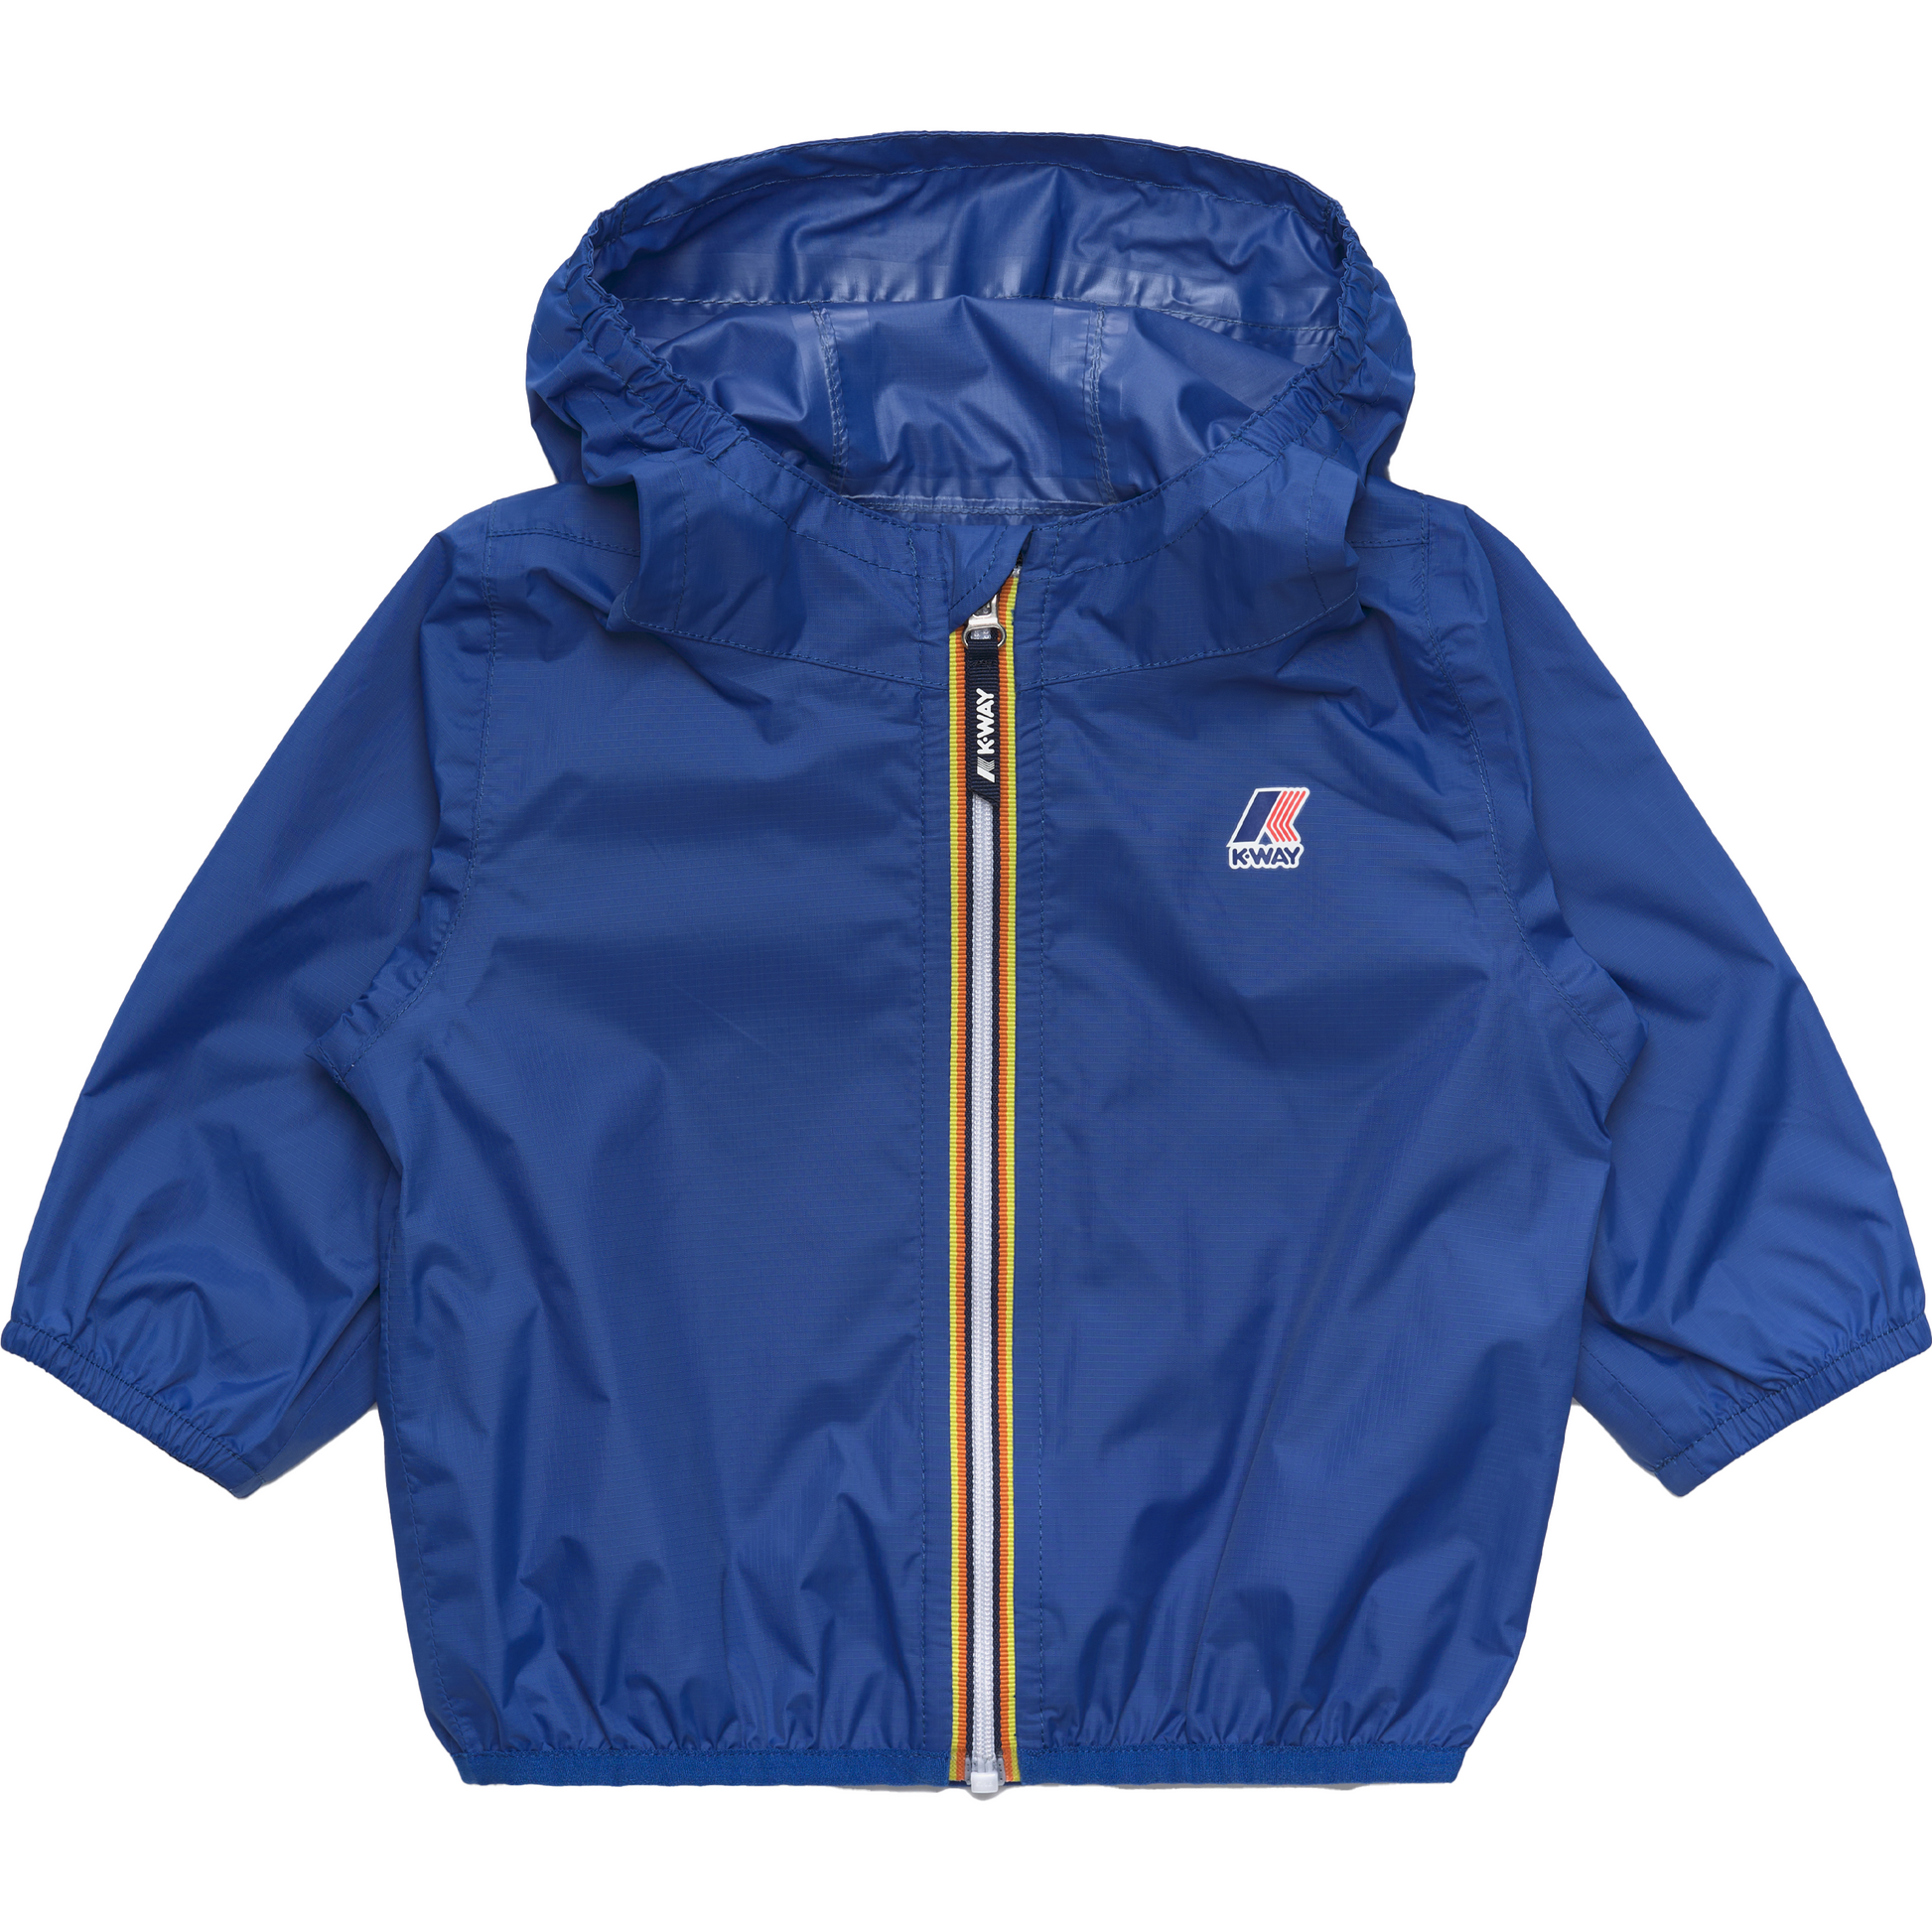 A K-Le Vrai 3.0 Claudine, Blue Royal Marine hooded jacket with a front zipper, featuring an elasticated hem and cuffs. Packable for convenience, it also boasts a small K-Way logo on the left chest.